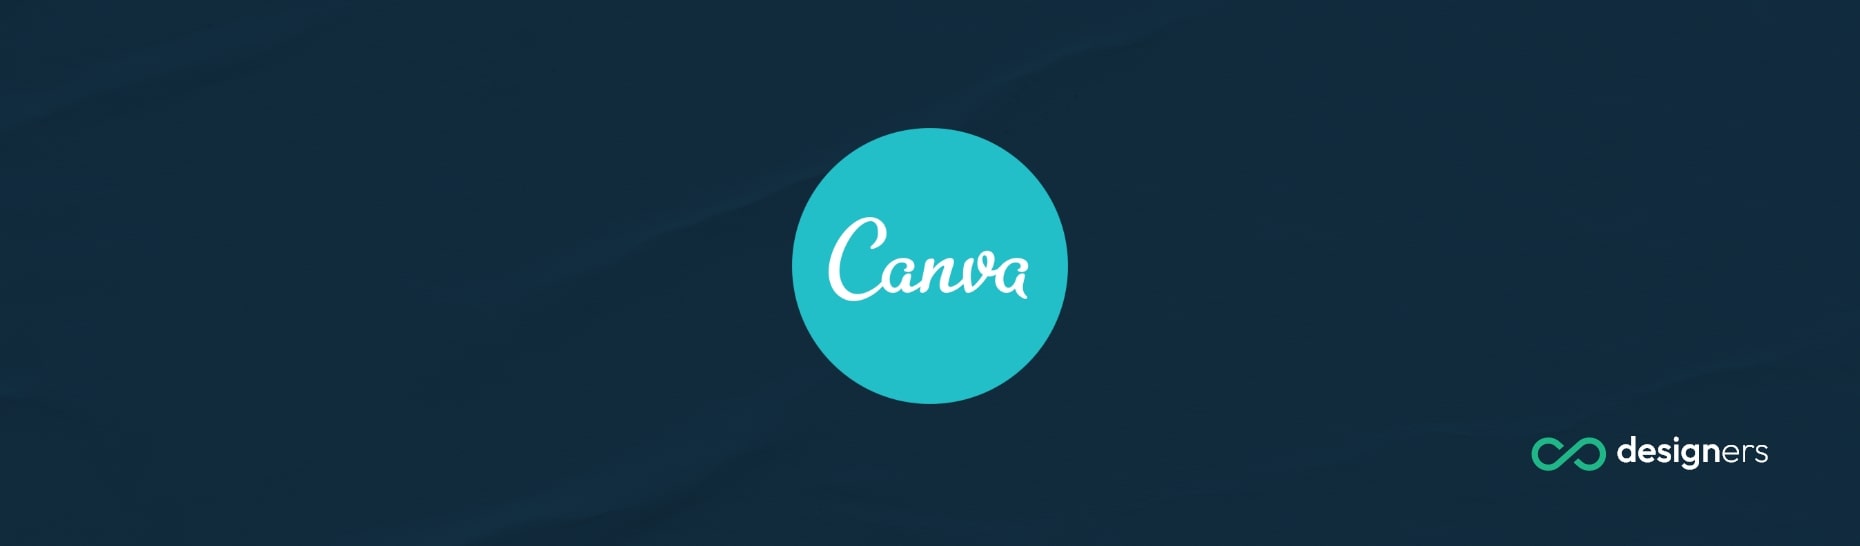 Is Canva Com Down?